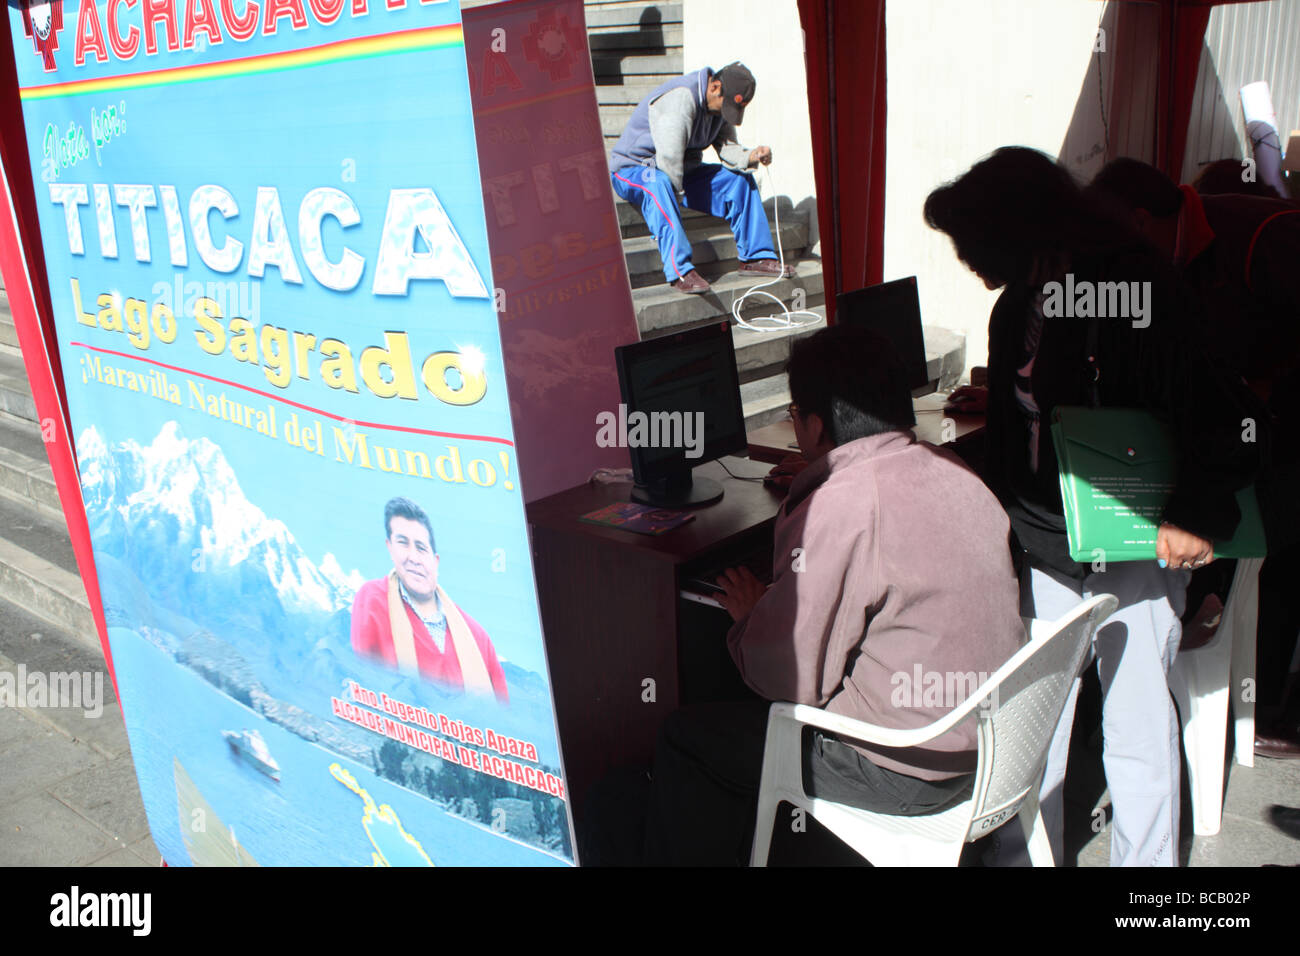 Stall to encourage people to vote for Lake Titicaca as one of The Seven Natural Wonders of the World, La Paz, Bolivia Stock Photo